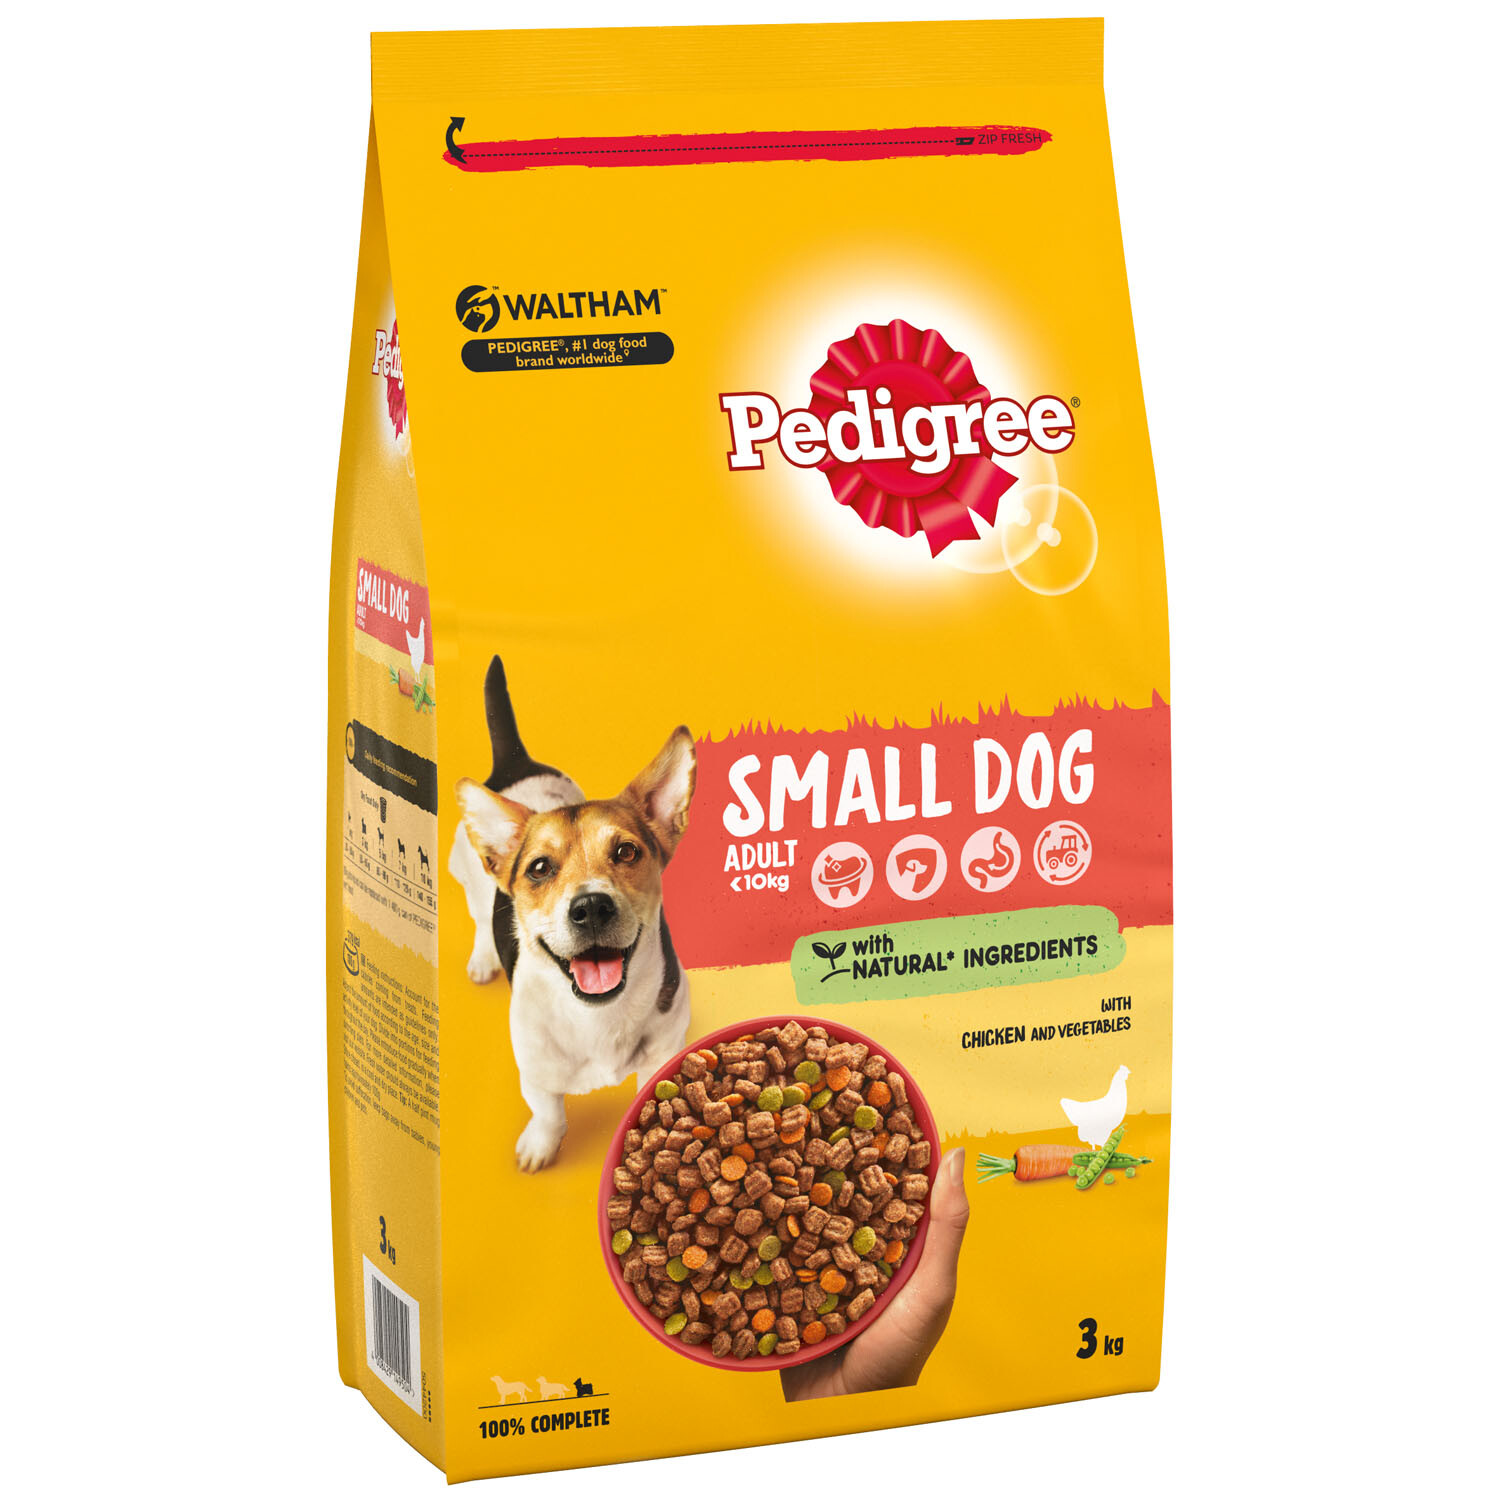 Pedigree Chicken and Vegetables Dry Small Dog Food 3kg Image 2